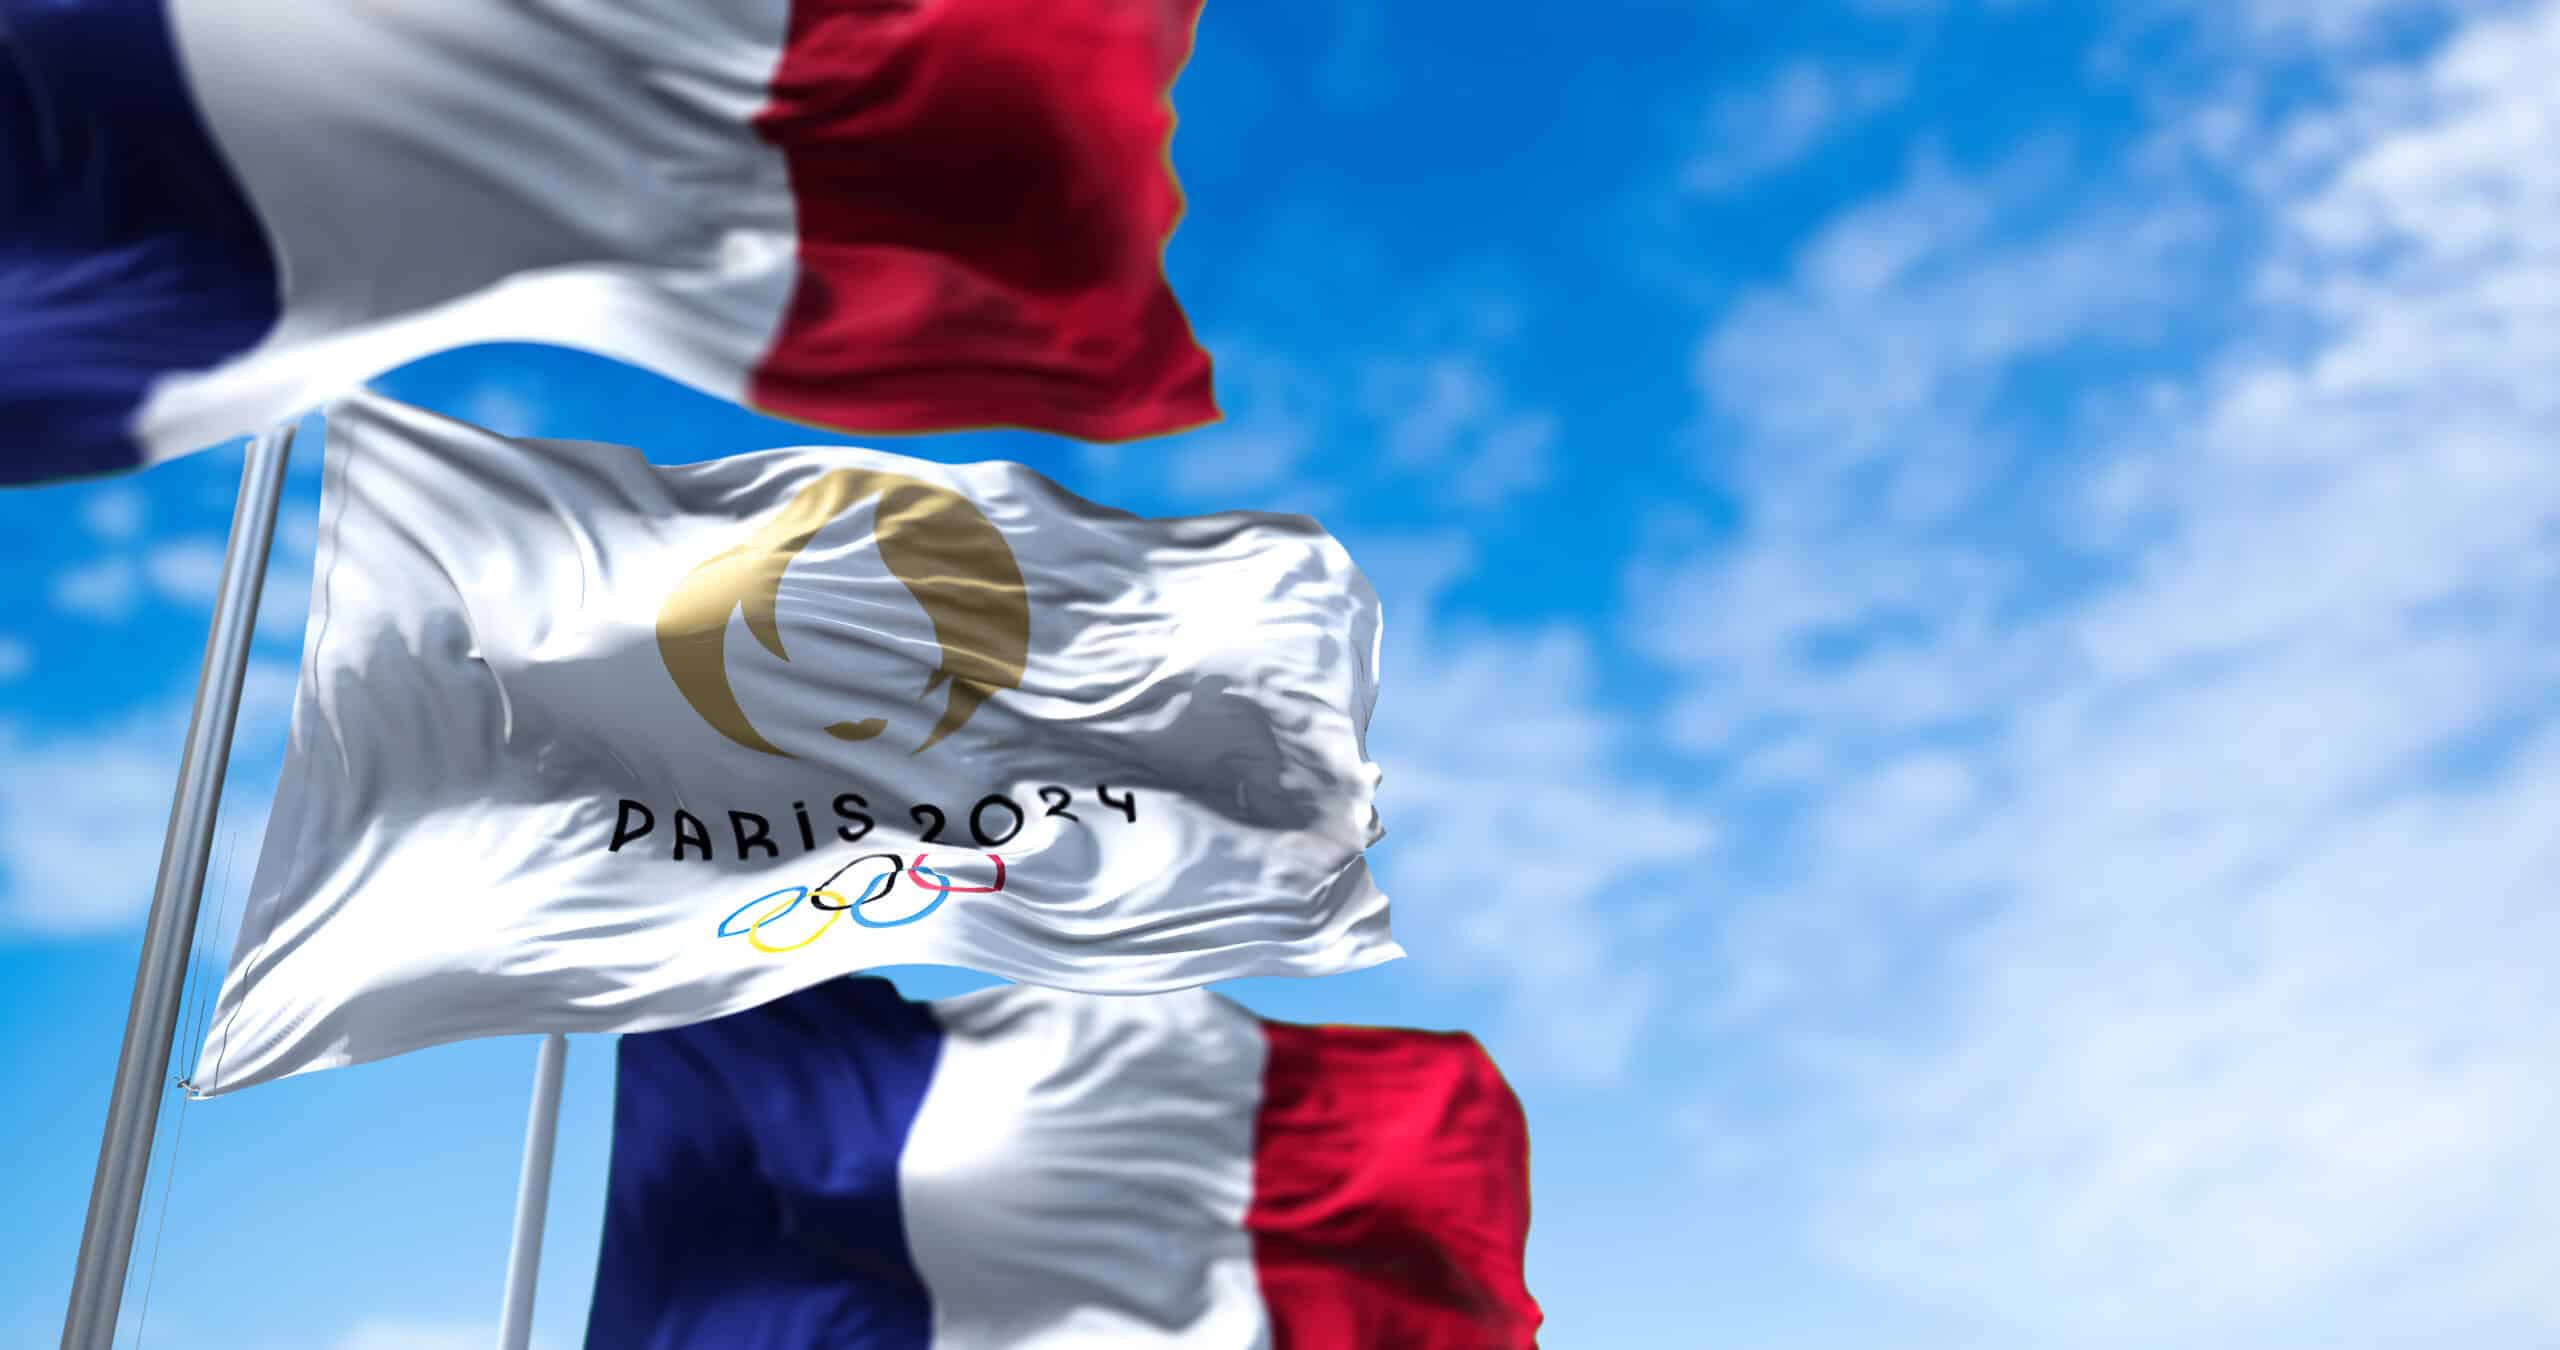 Tokyo, Japan, July 2021: Paris 24 Olympic flag waving in the wind between two French flags. Paris 2024 summer olympics games are scheduled from 26 July to 11 August 2024 in Paris